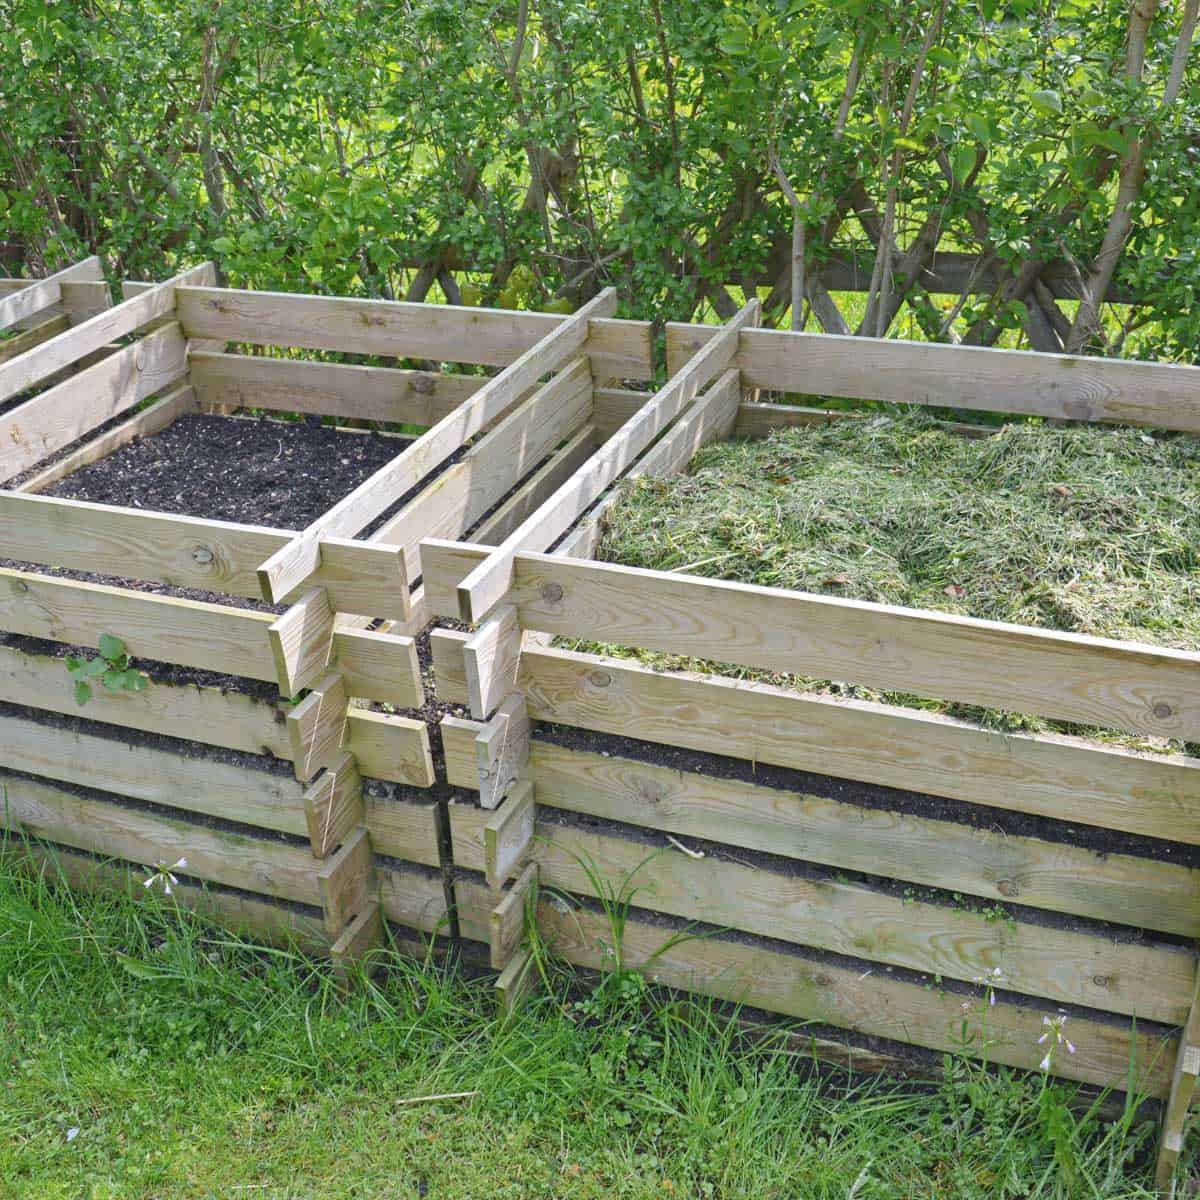 Where To Place A Compost Bin: The Best Location